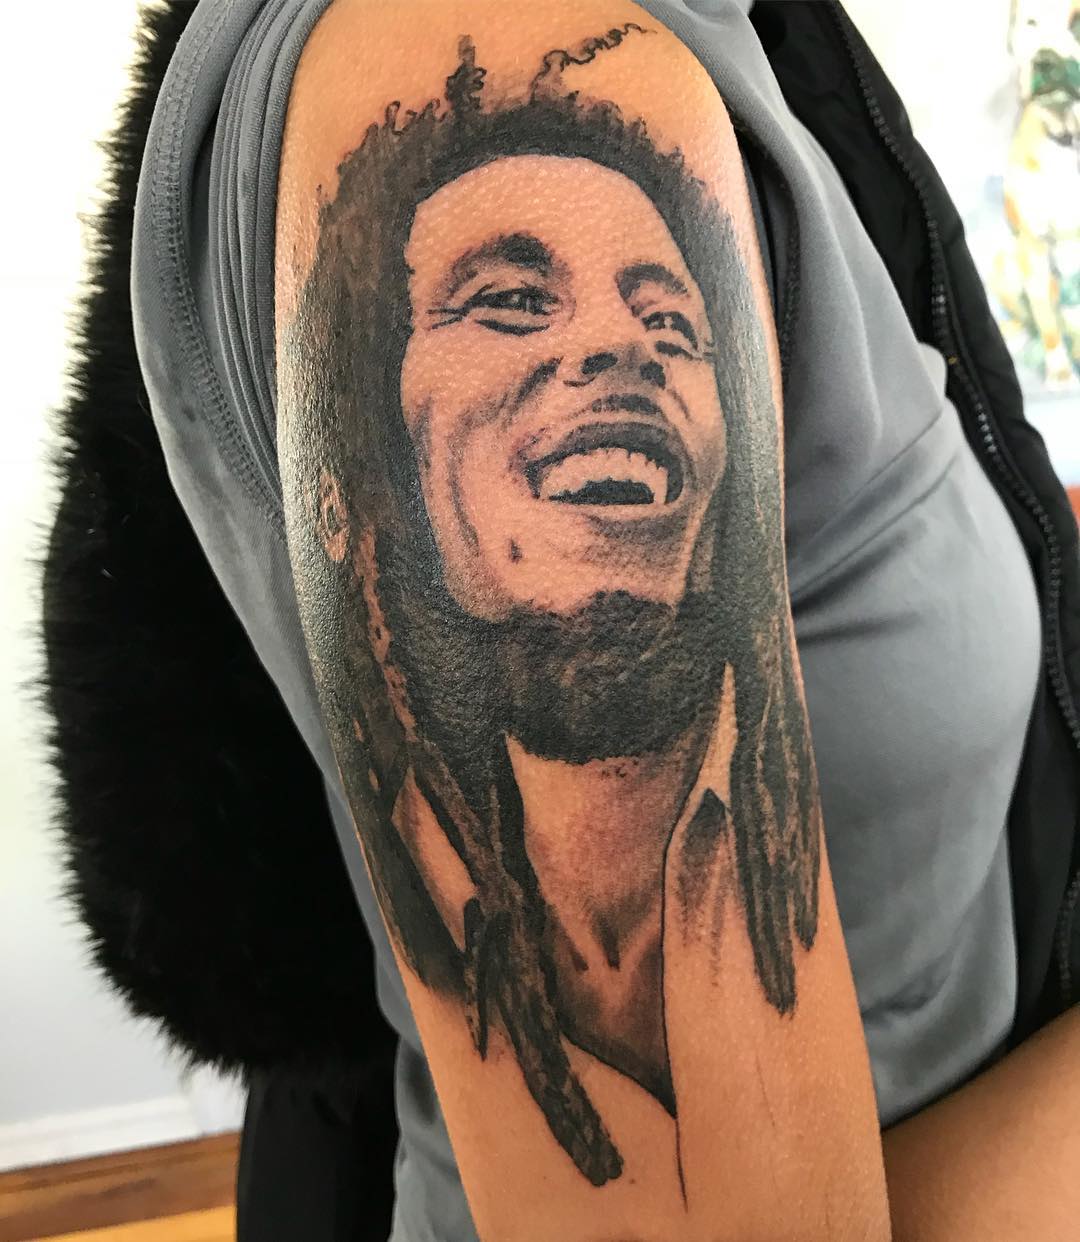 Bob Marley Tattoos Designs Ideas and Meaning  Tattoos For You